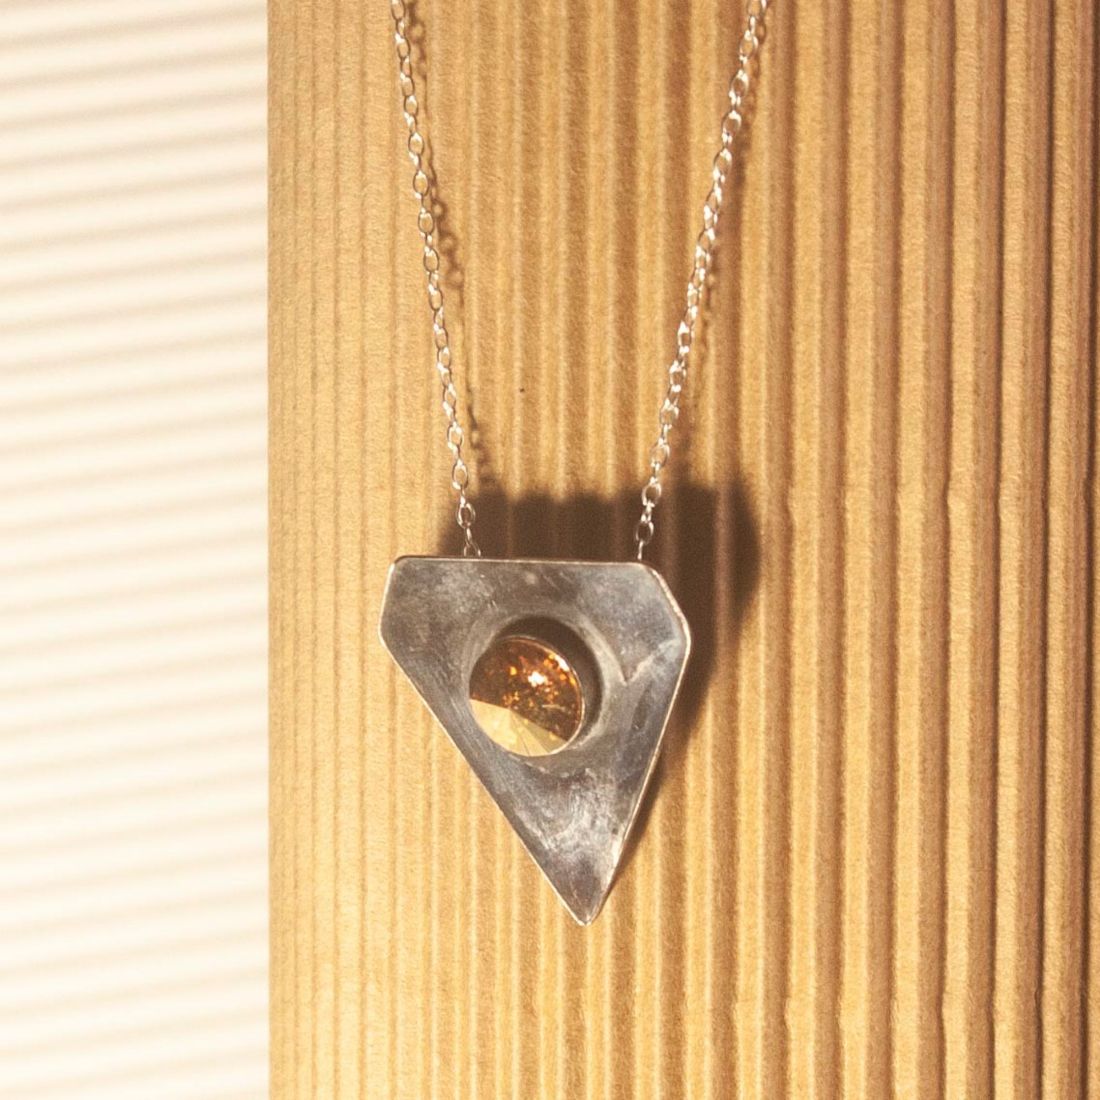 GEOMETRIC SILVER NECKLACE